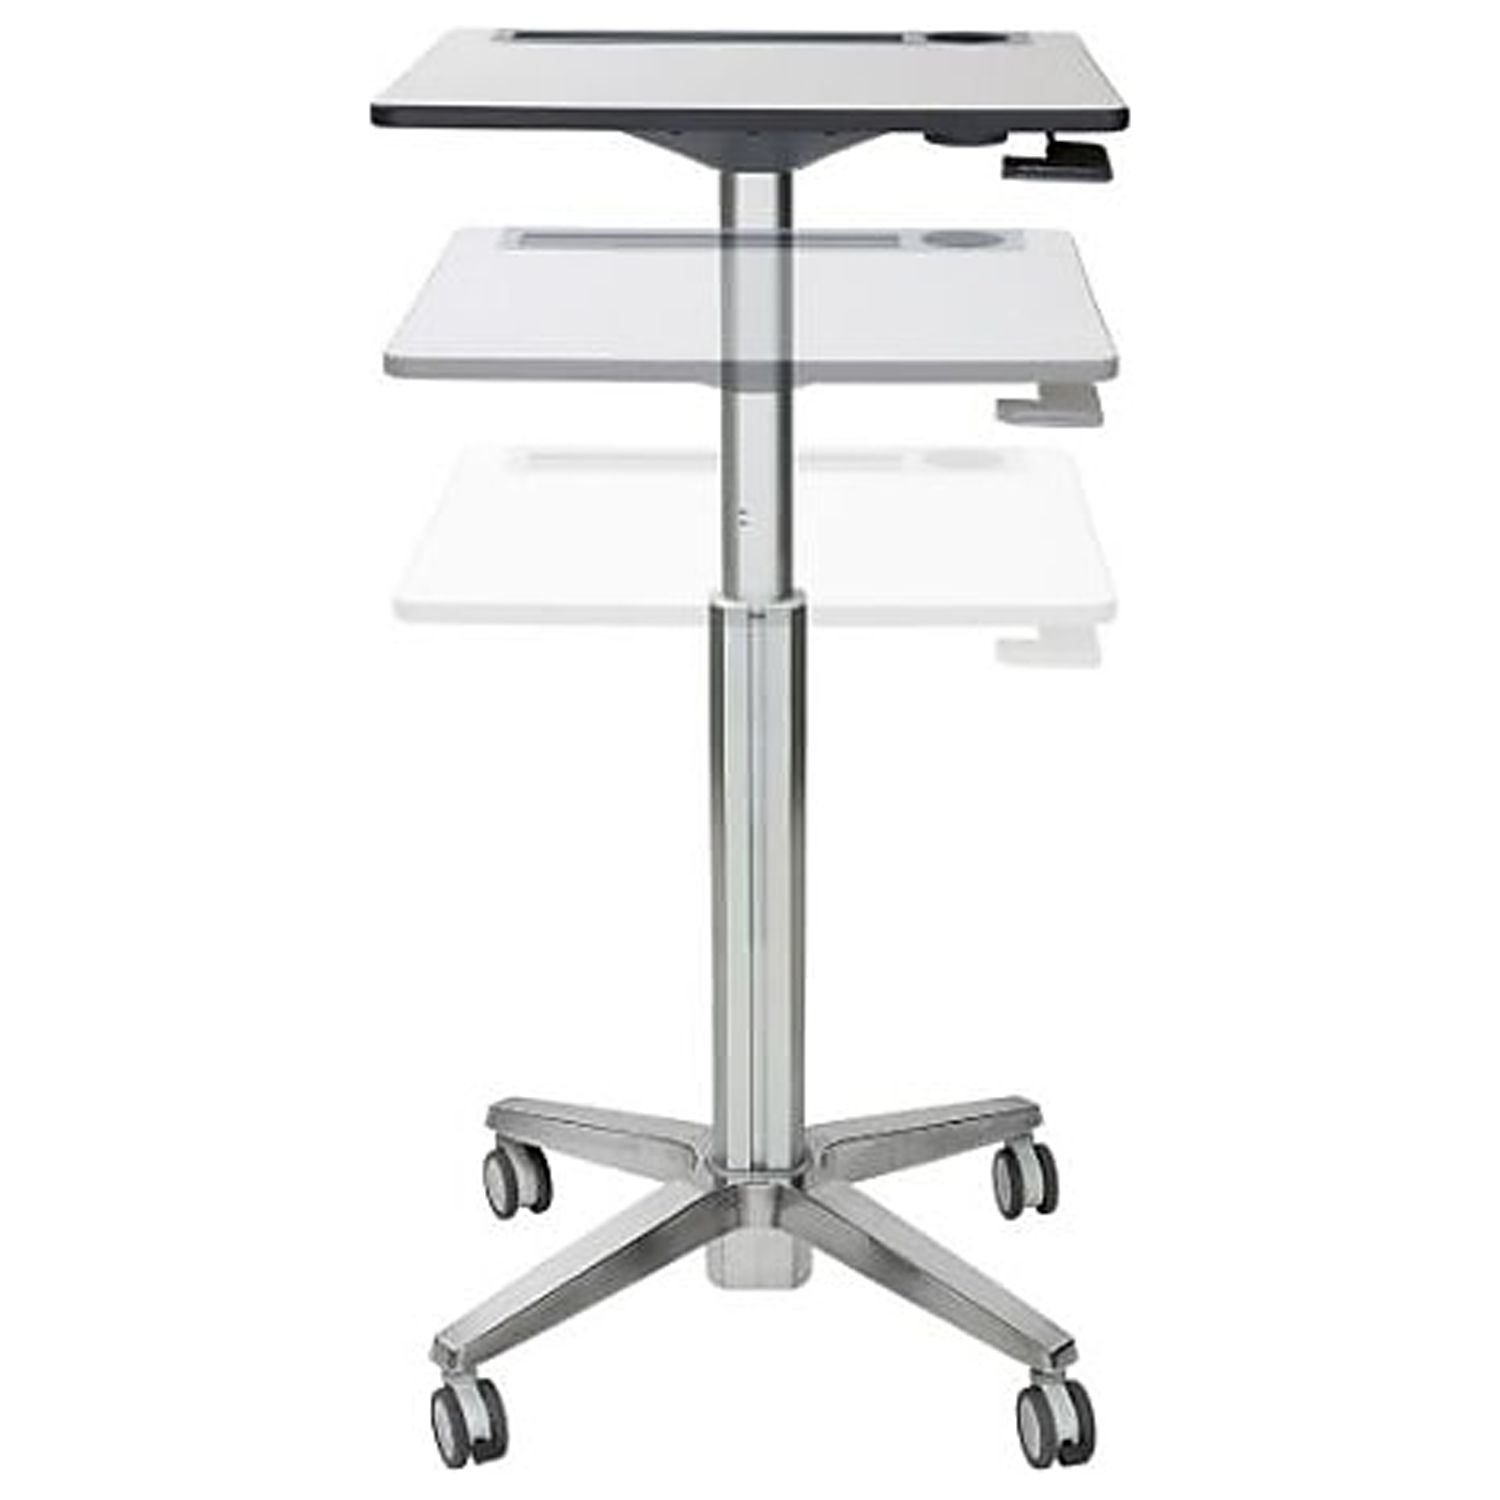 Ergotron LearnFit Sit-Stand Desk, Tall - image 2 of 6